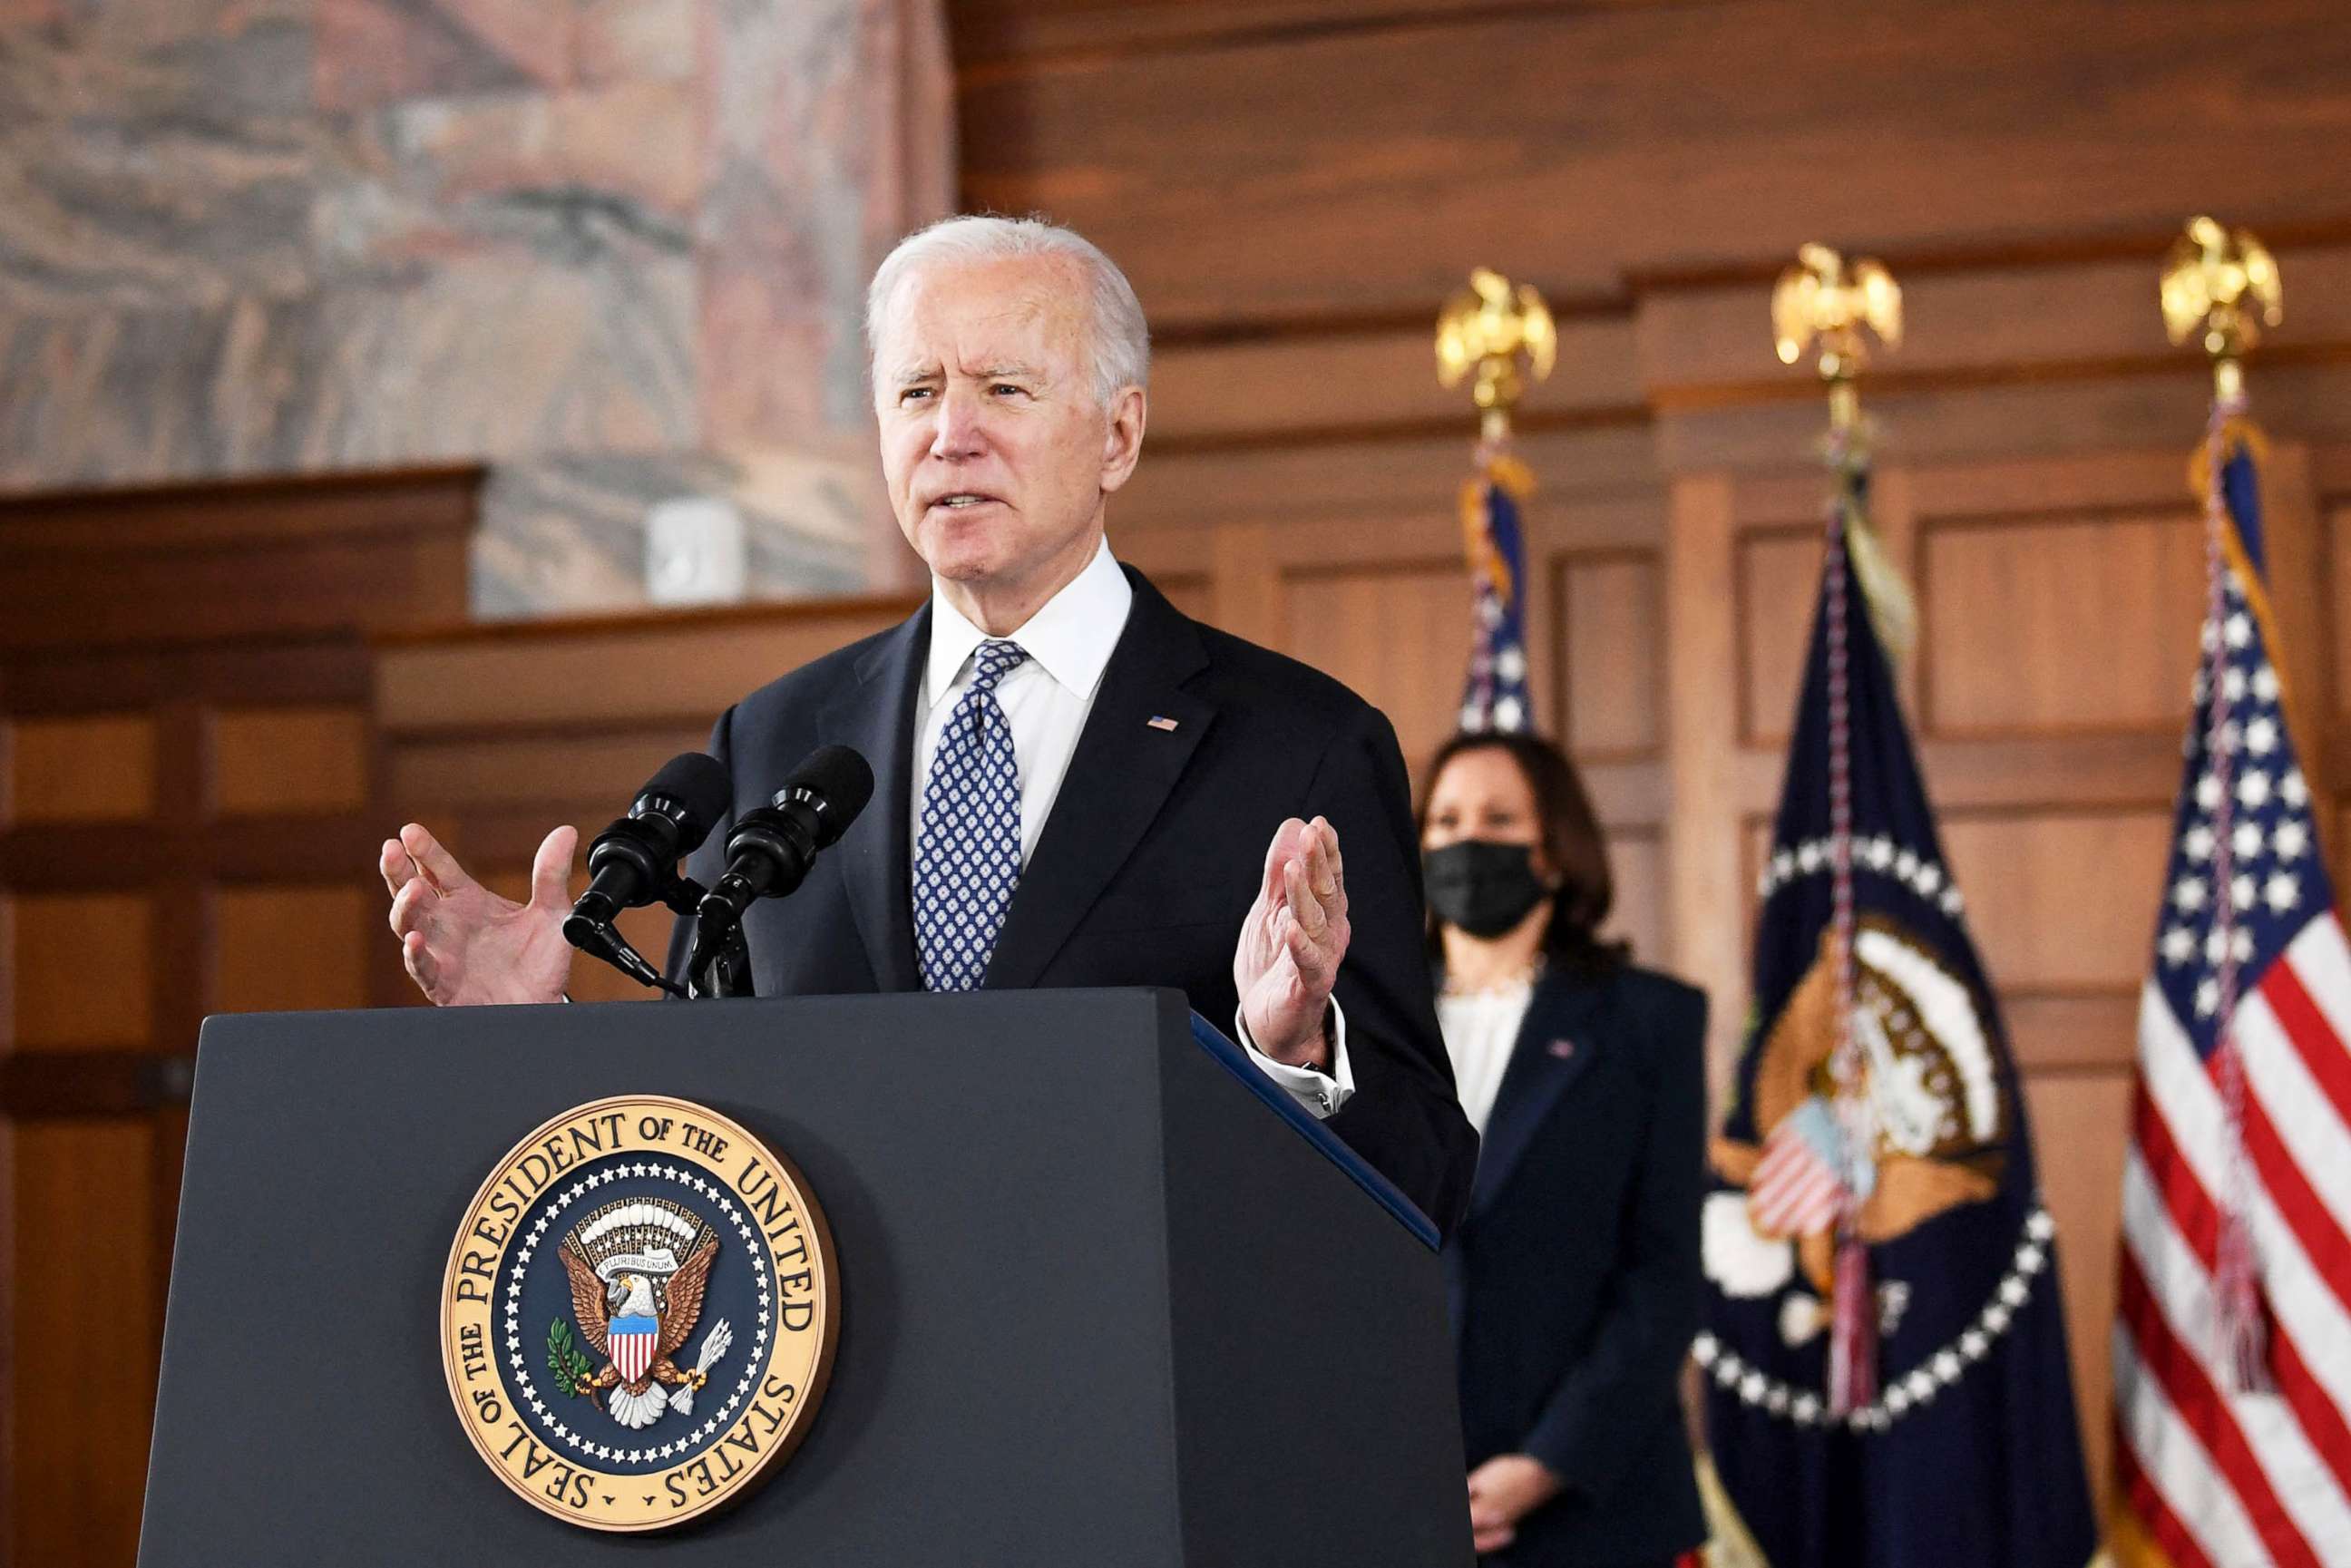 PHOTO: President Joe Biden speaks, flanked by US Vice President Kamala Harris, during a listening session with Georgia Asian American and Pacific Islander community leaders at Emory University in Atlanta, March 19, 2021.